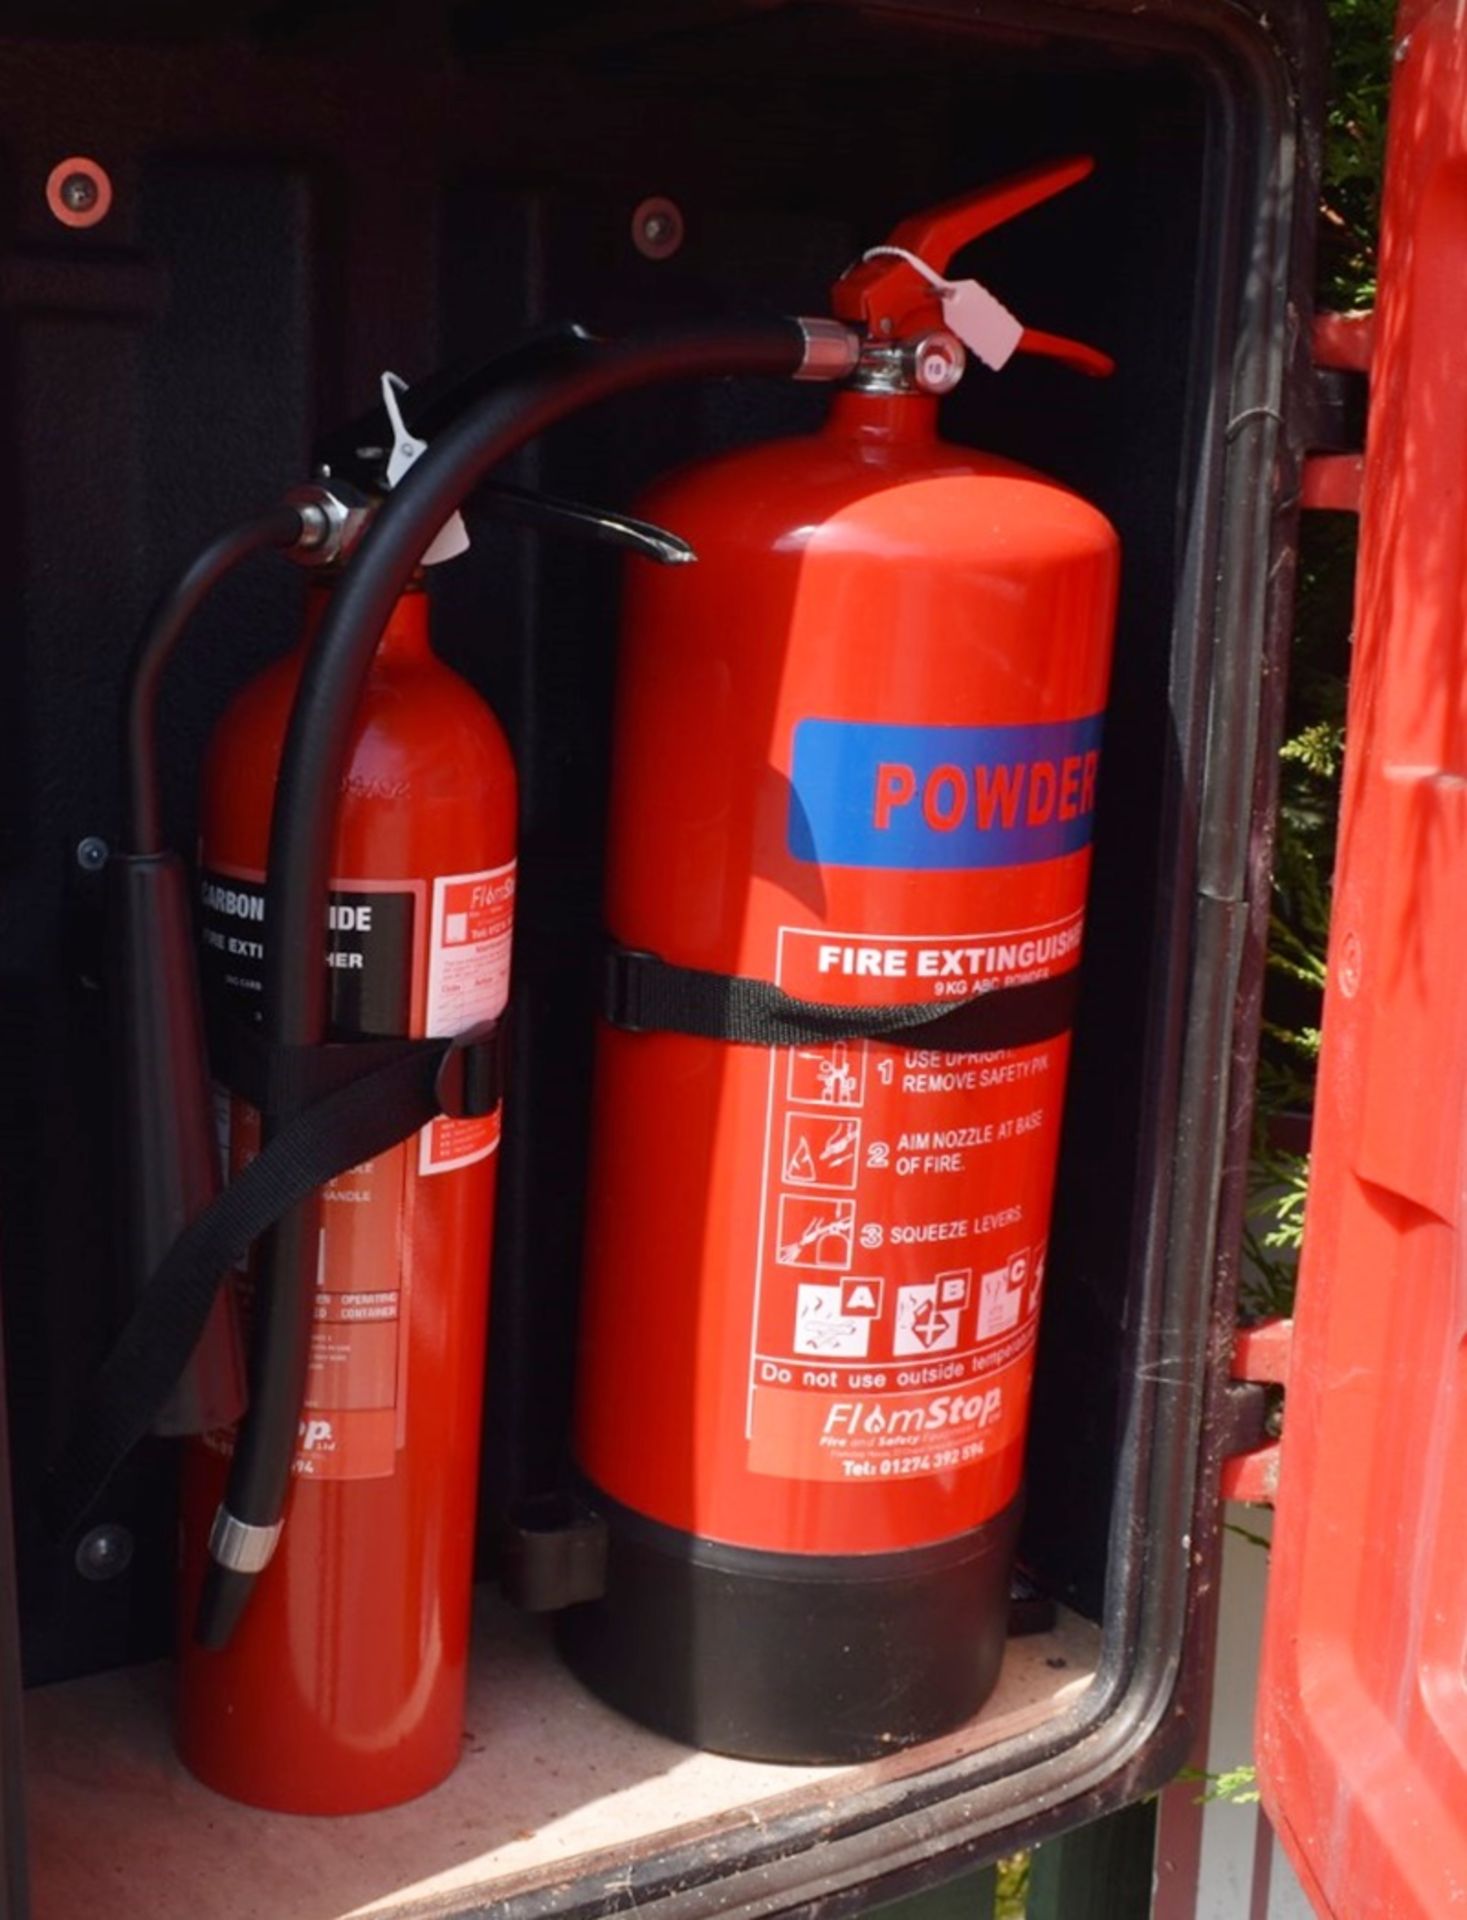 1 x Outdoor Fire Extinguisher Cabinet With Carbon Dioxide and Powder Fire Extinguishers - Ref - Image 2 of 3